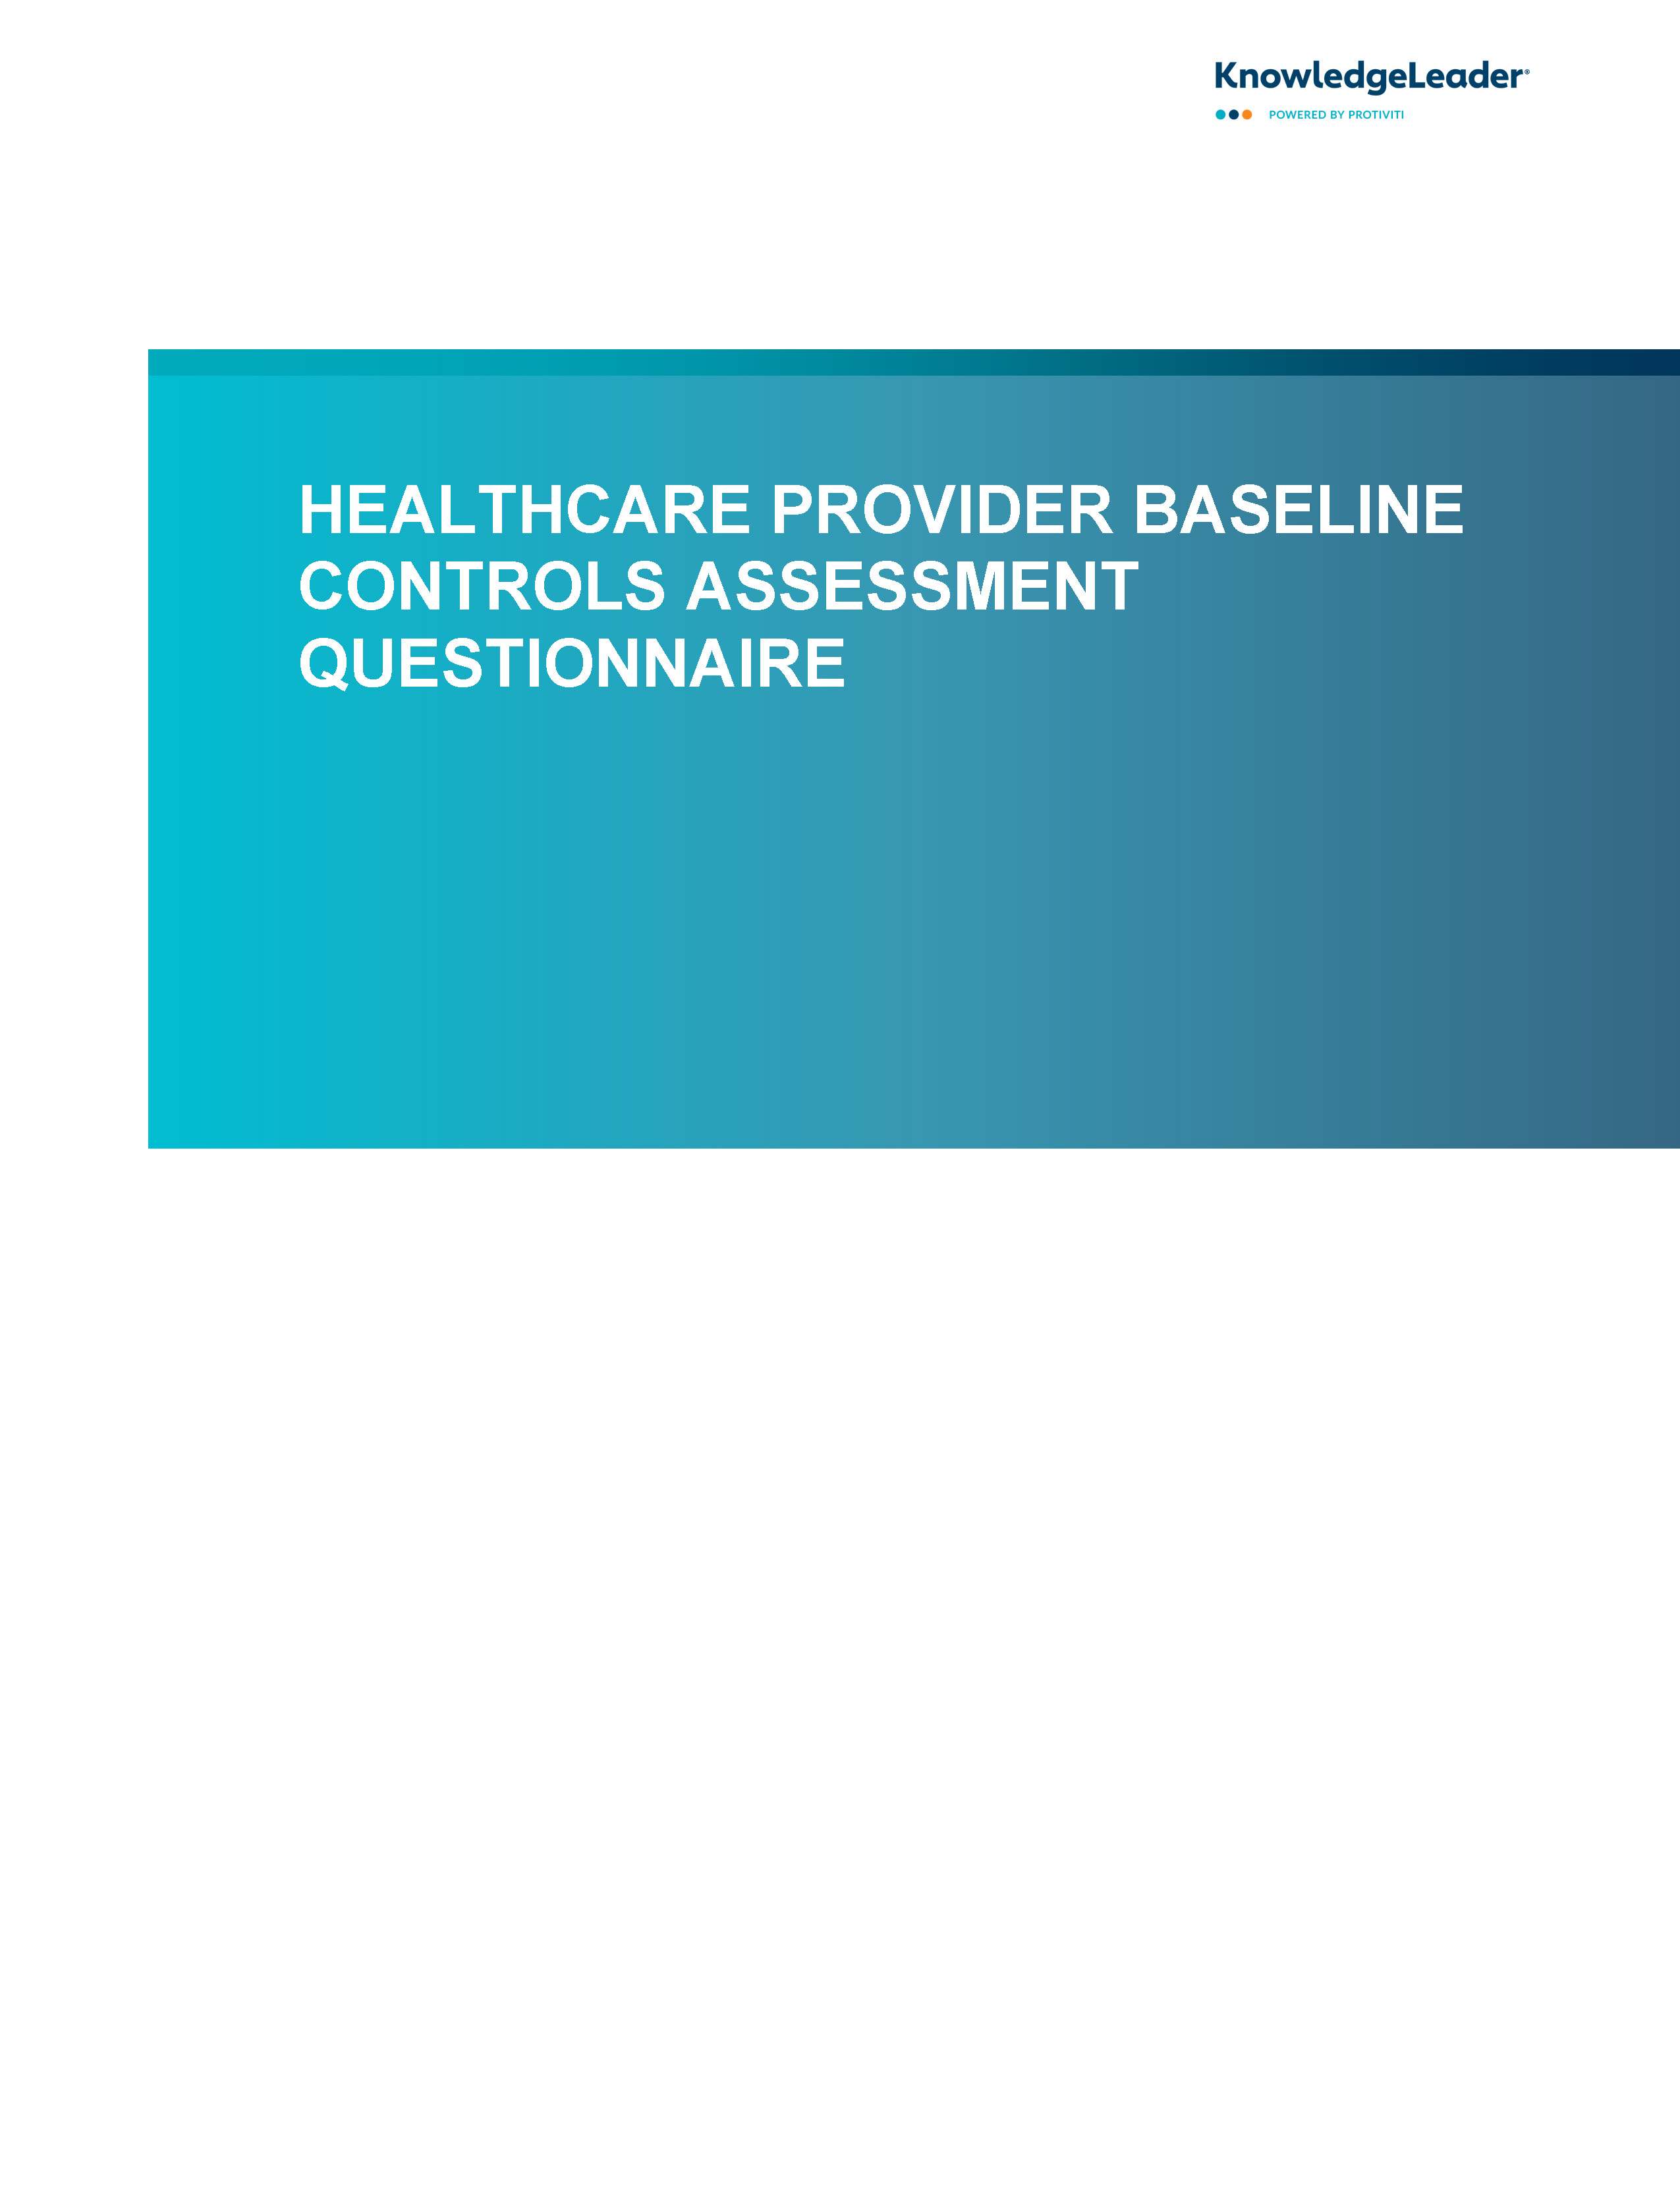 Screenshot of the first page of Healthcare Provider Baseline Controls Assessment Questionnaire